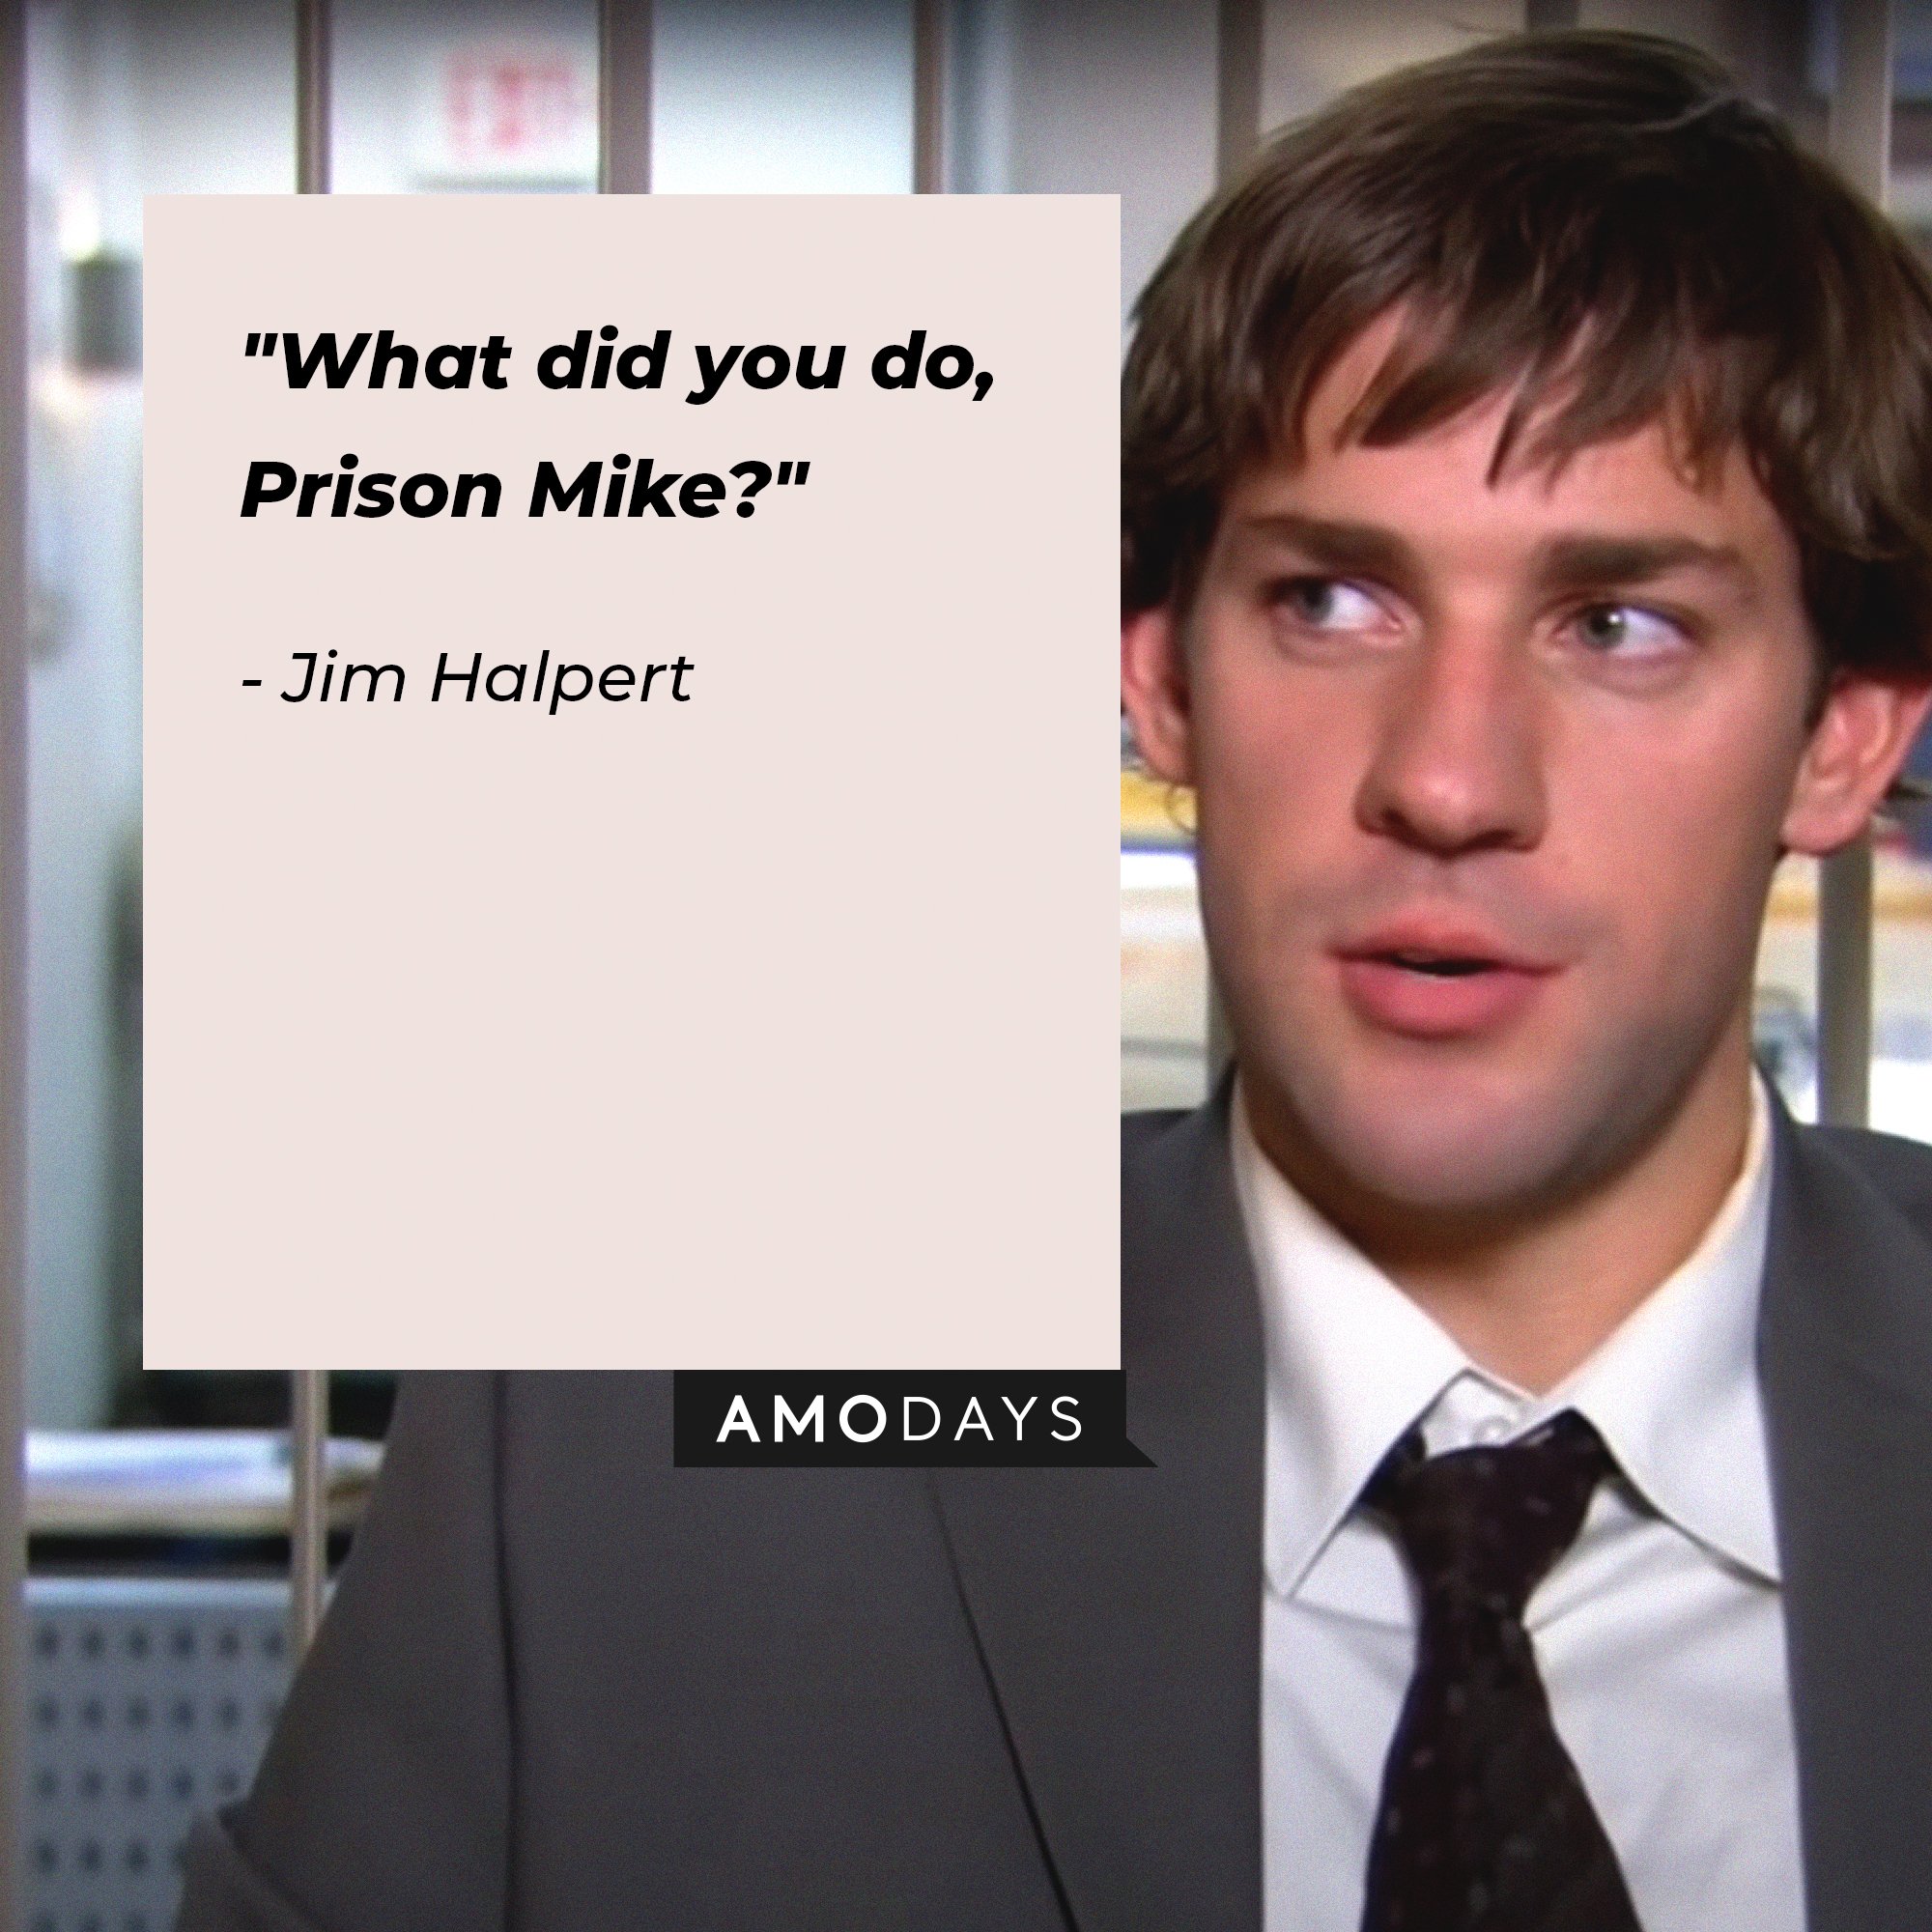 Jim Halpert’s quote: "What did you do, Prison Mike?" | Image: AmoDays